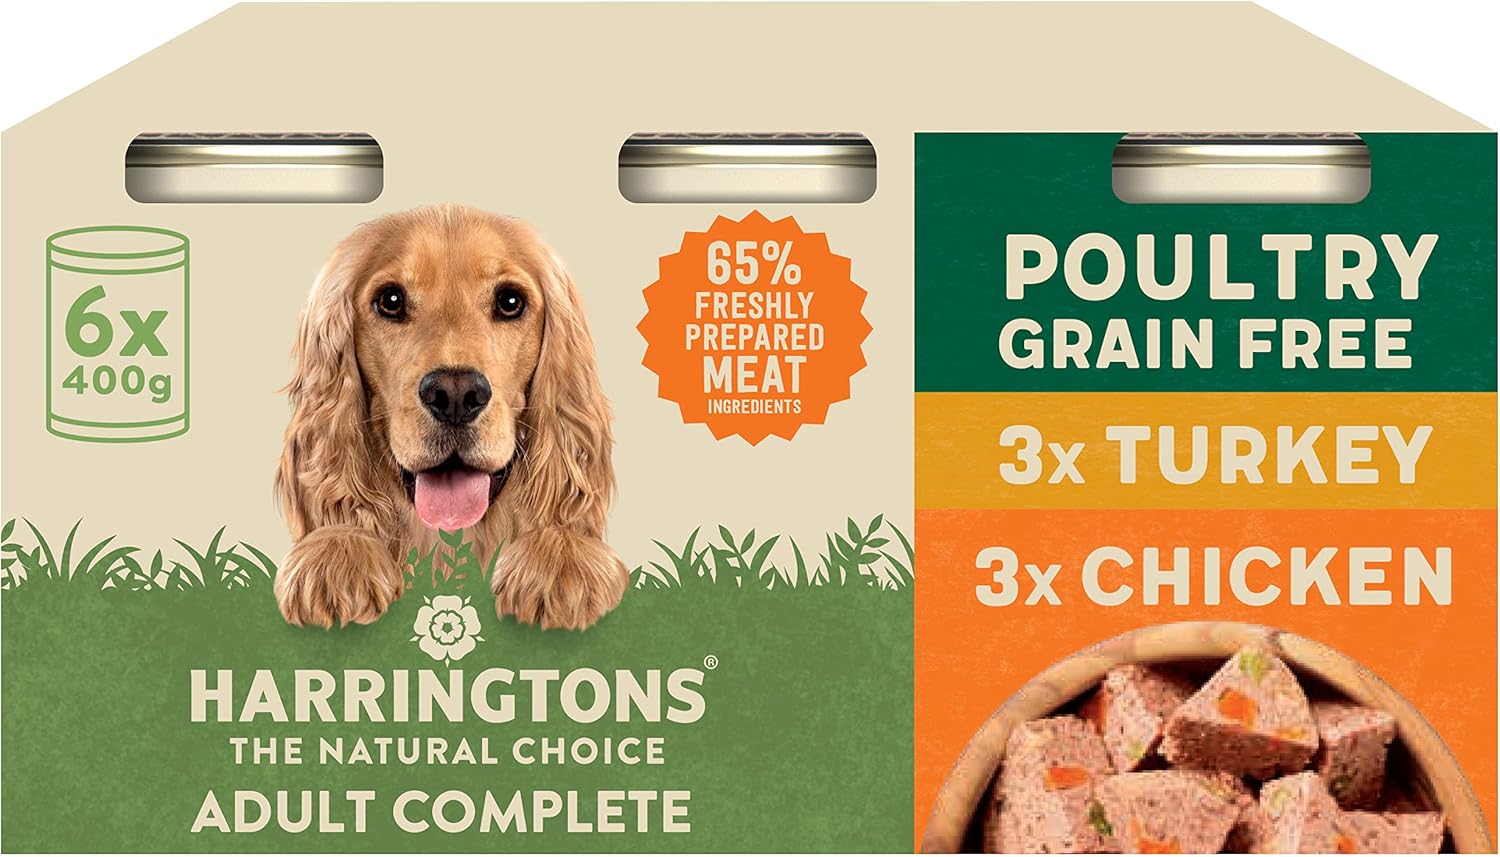 Harringtons Complete Wet Can Grain Free Hypoallergenic Adult Dog Food Poultry Pack 6x400g - Chicken & Turkey - Made with All Natural Ingredients?HARRCANMUL-C400